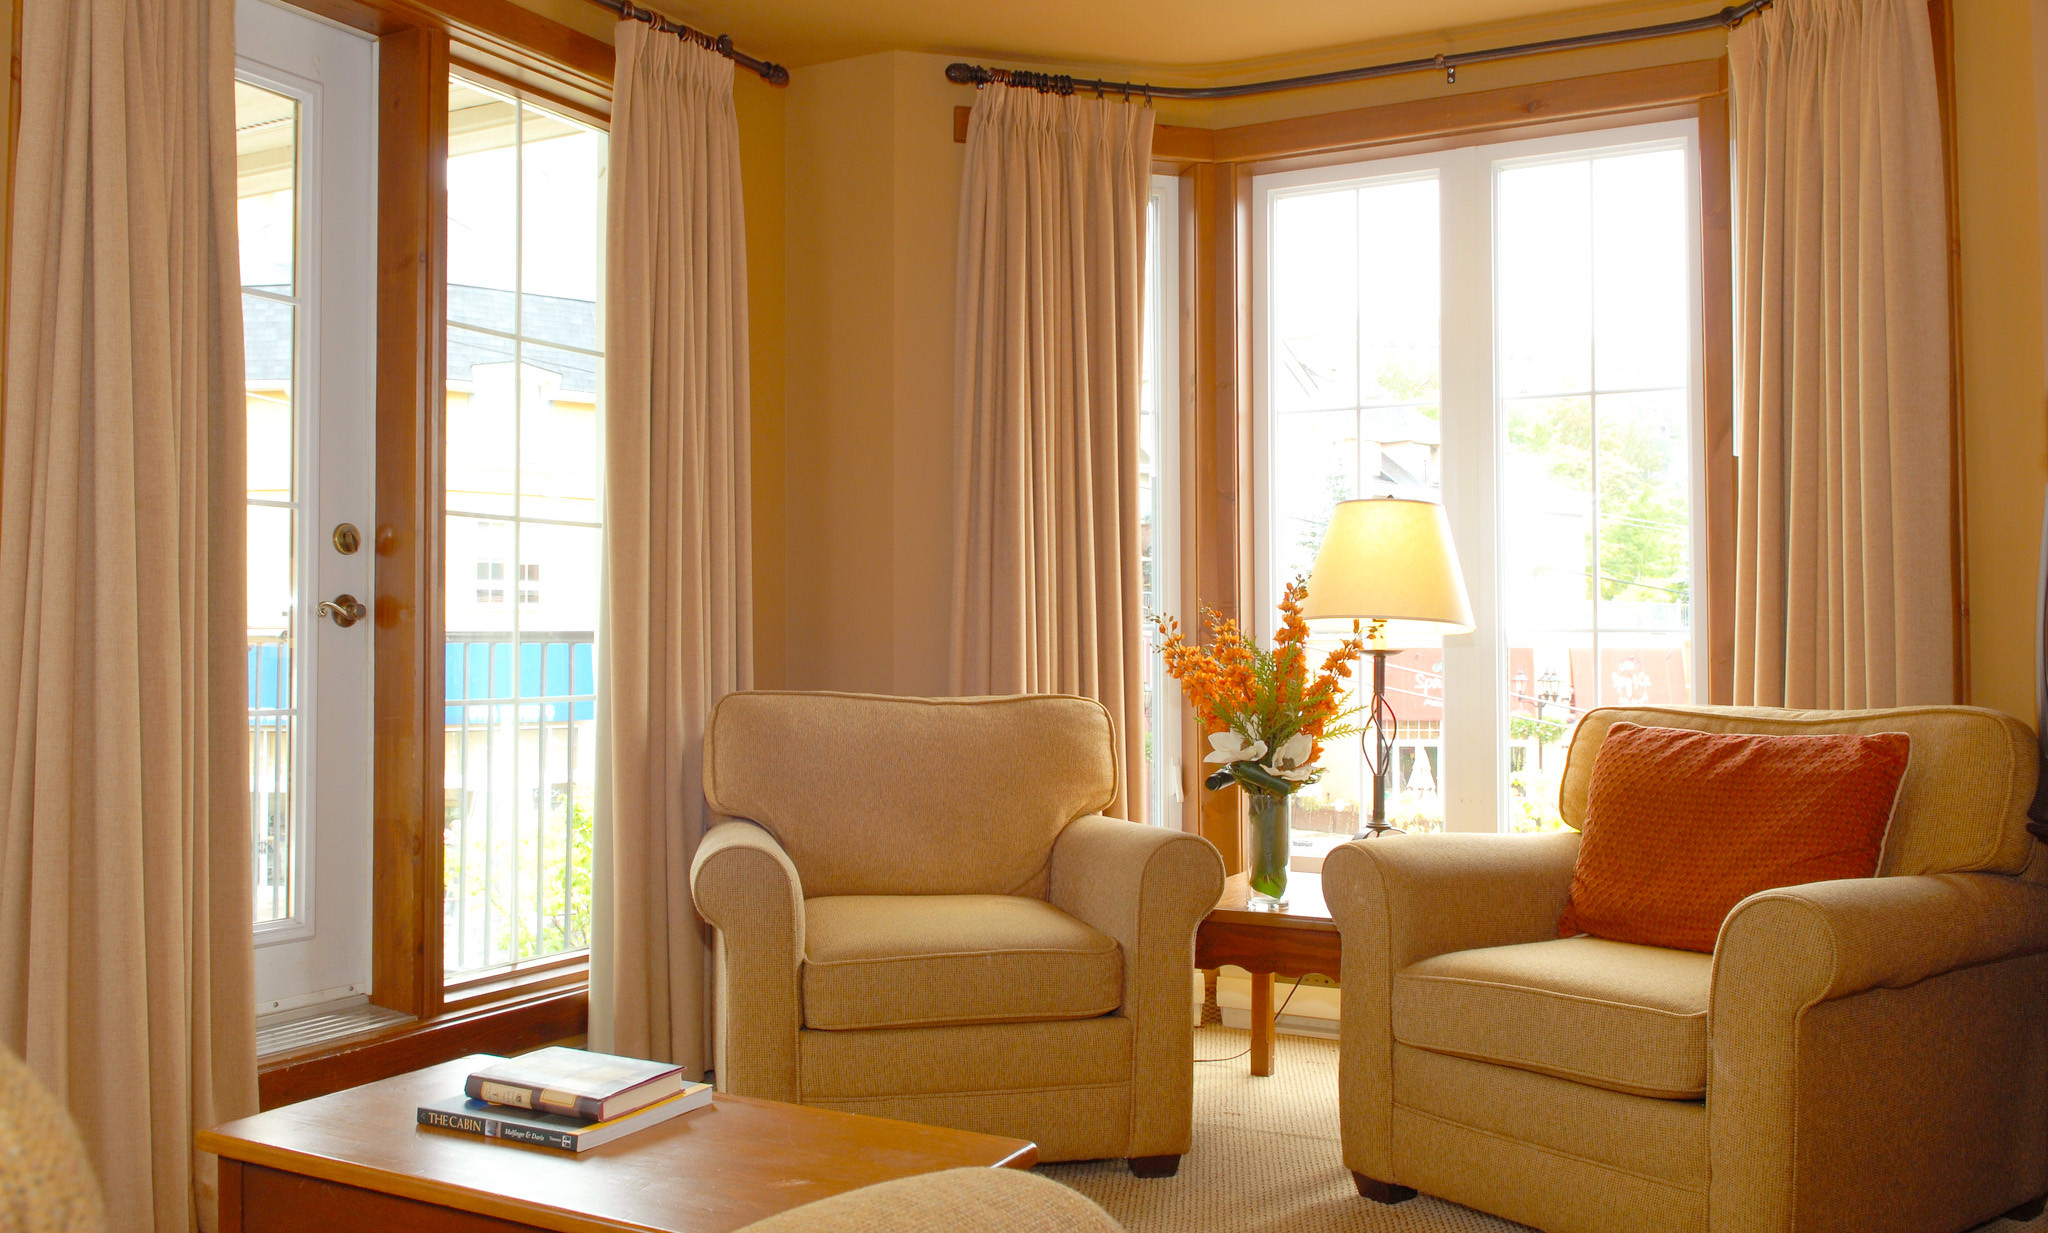 Curtains For Living Room Windows
 Tips for Choosing Living Room Curtain